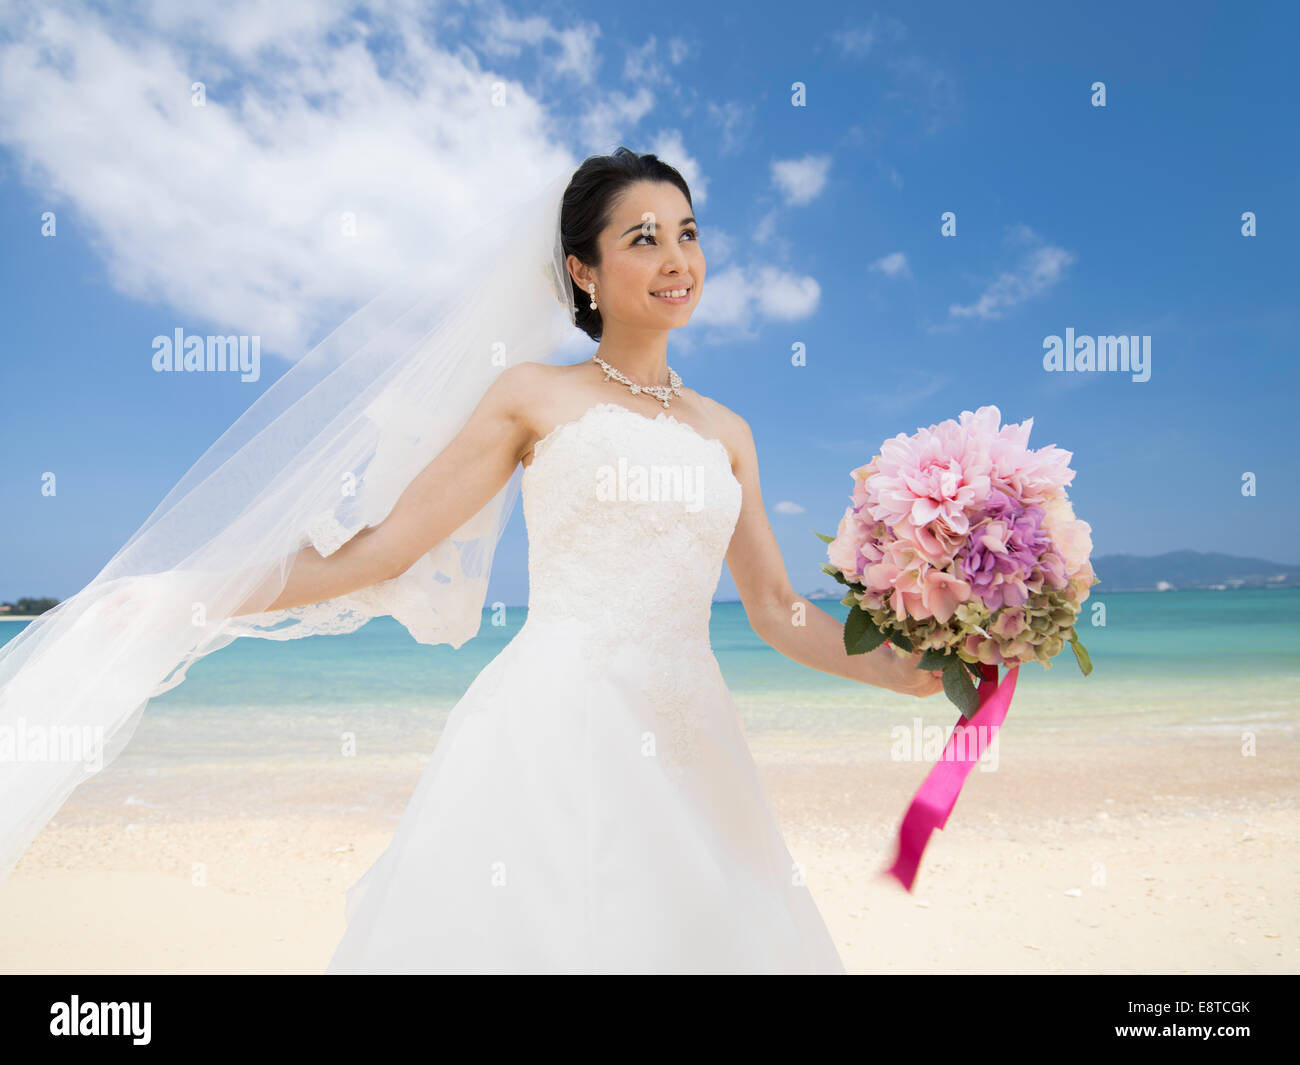 Mixed race, Asian / American bride in white wedding dress at destination beach wedding in Okinawa, Japan Stock Photo